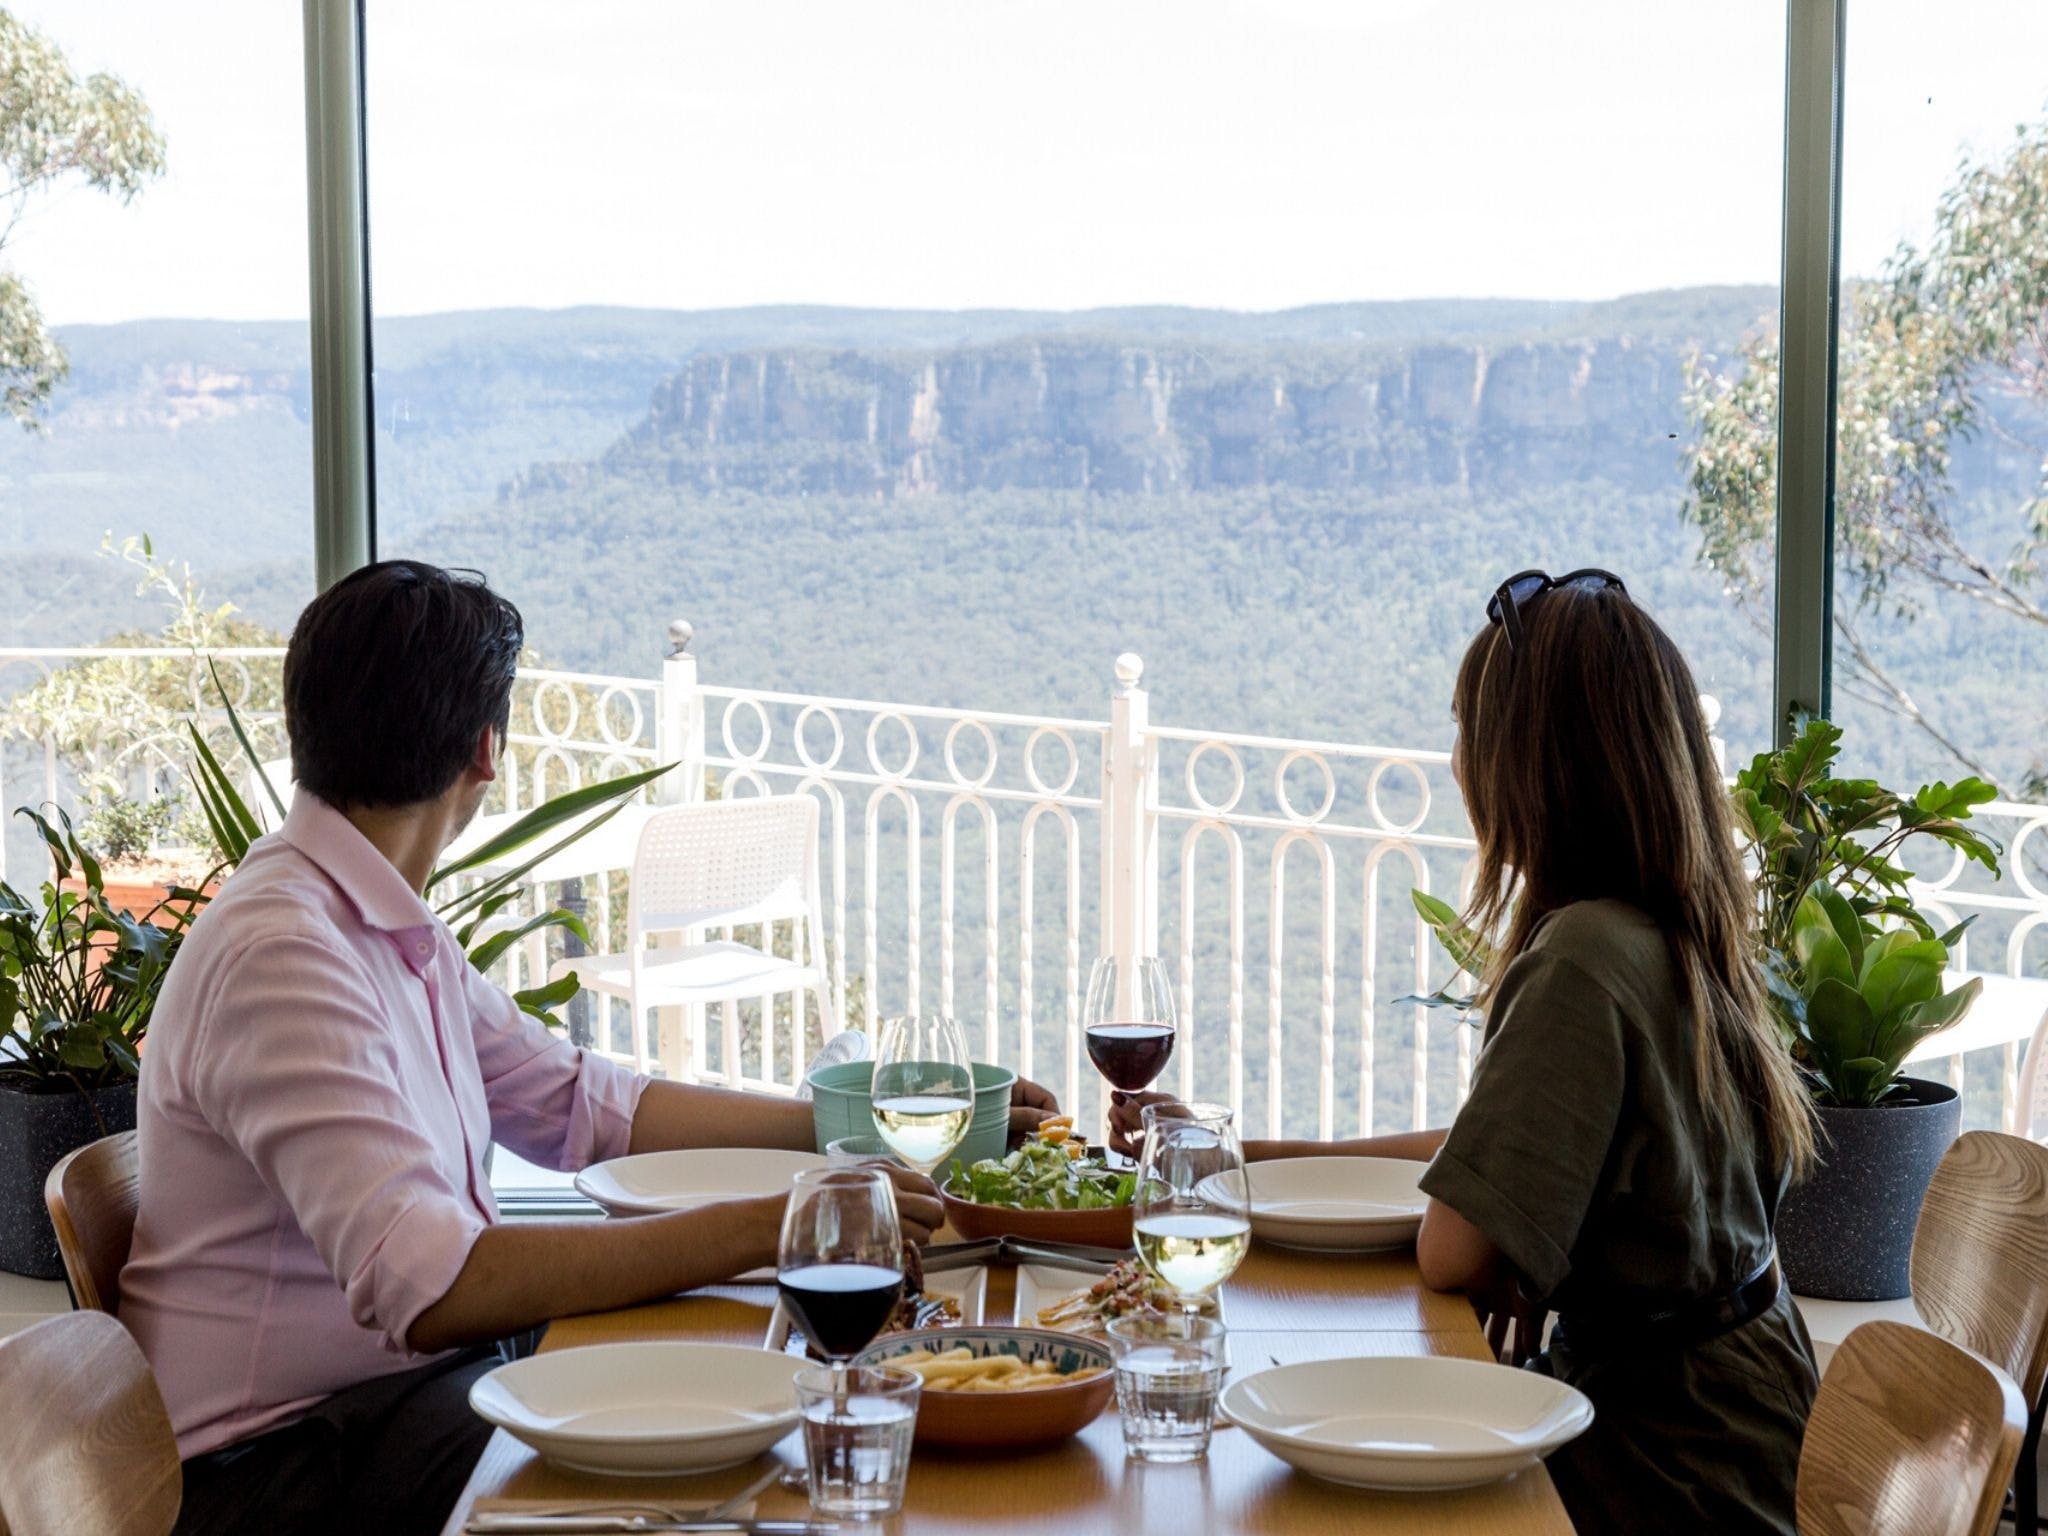 Christmas Day Lunch at The Lookout Echo Point - Accommodation Bookings